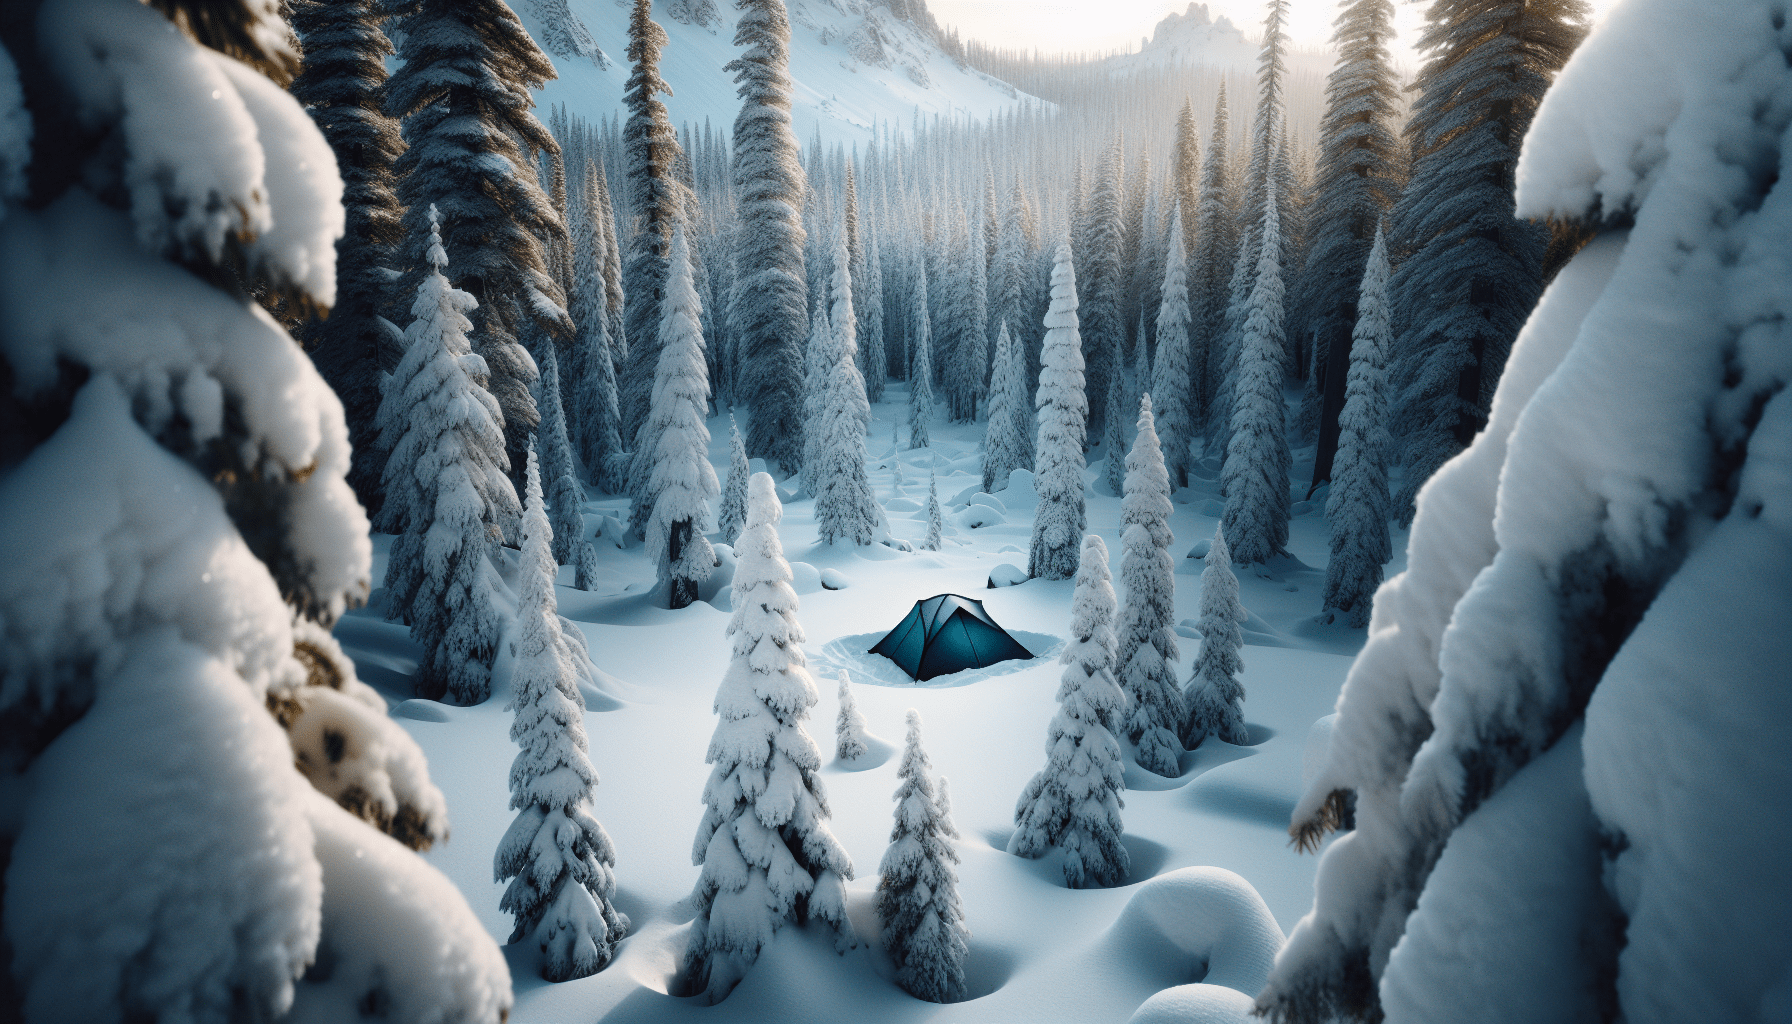 Can You Go Camping In The Winter On Mount Shasta?